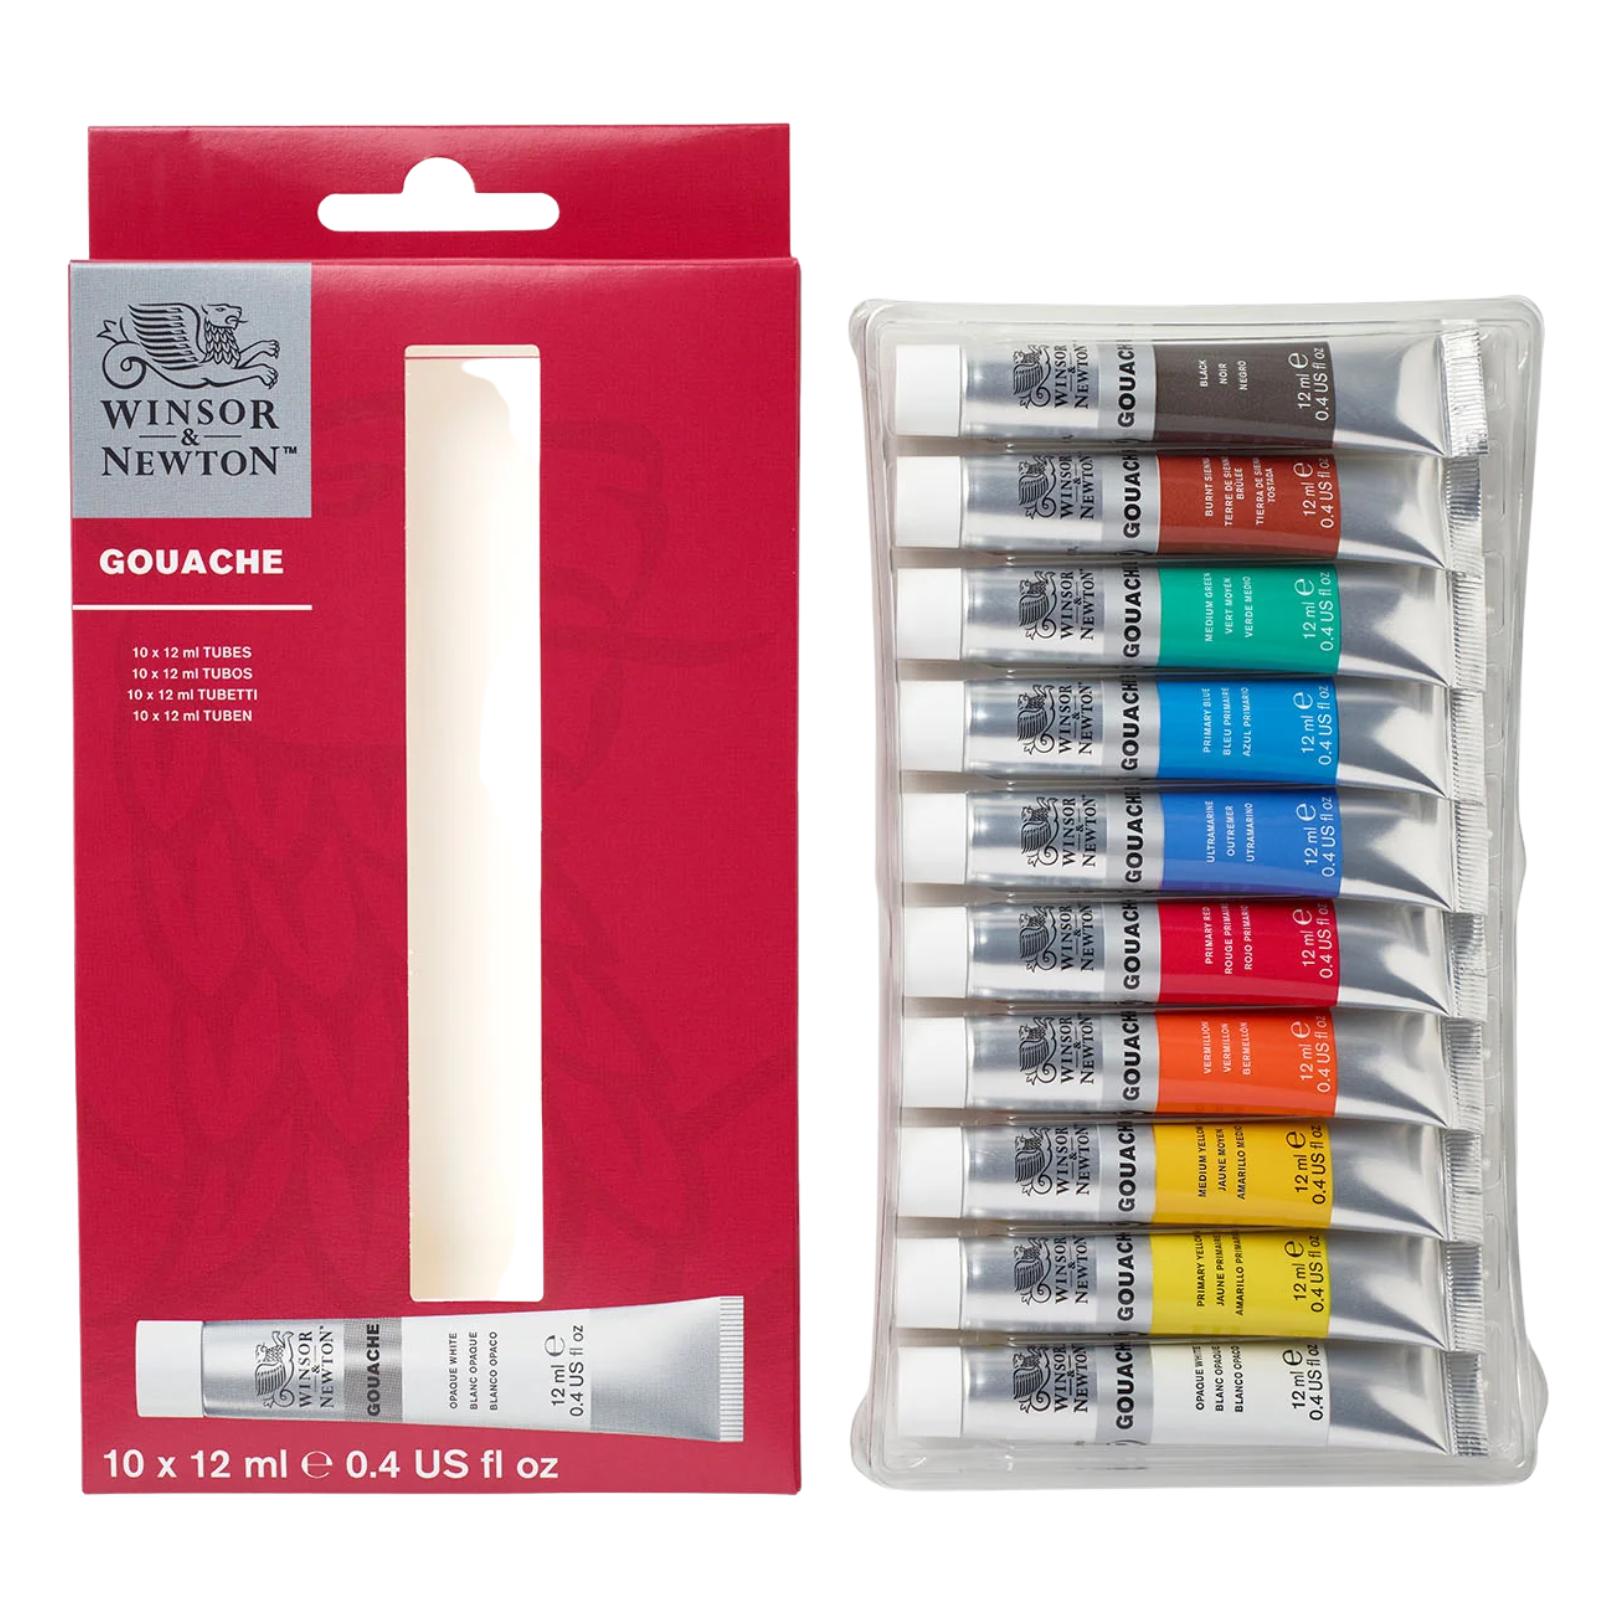 Winsor & Newton Gouache Primary Colour Set, 12ml, 10 Colours - made from quality, fine art pigments